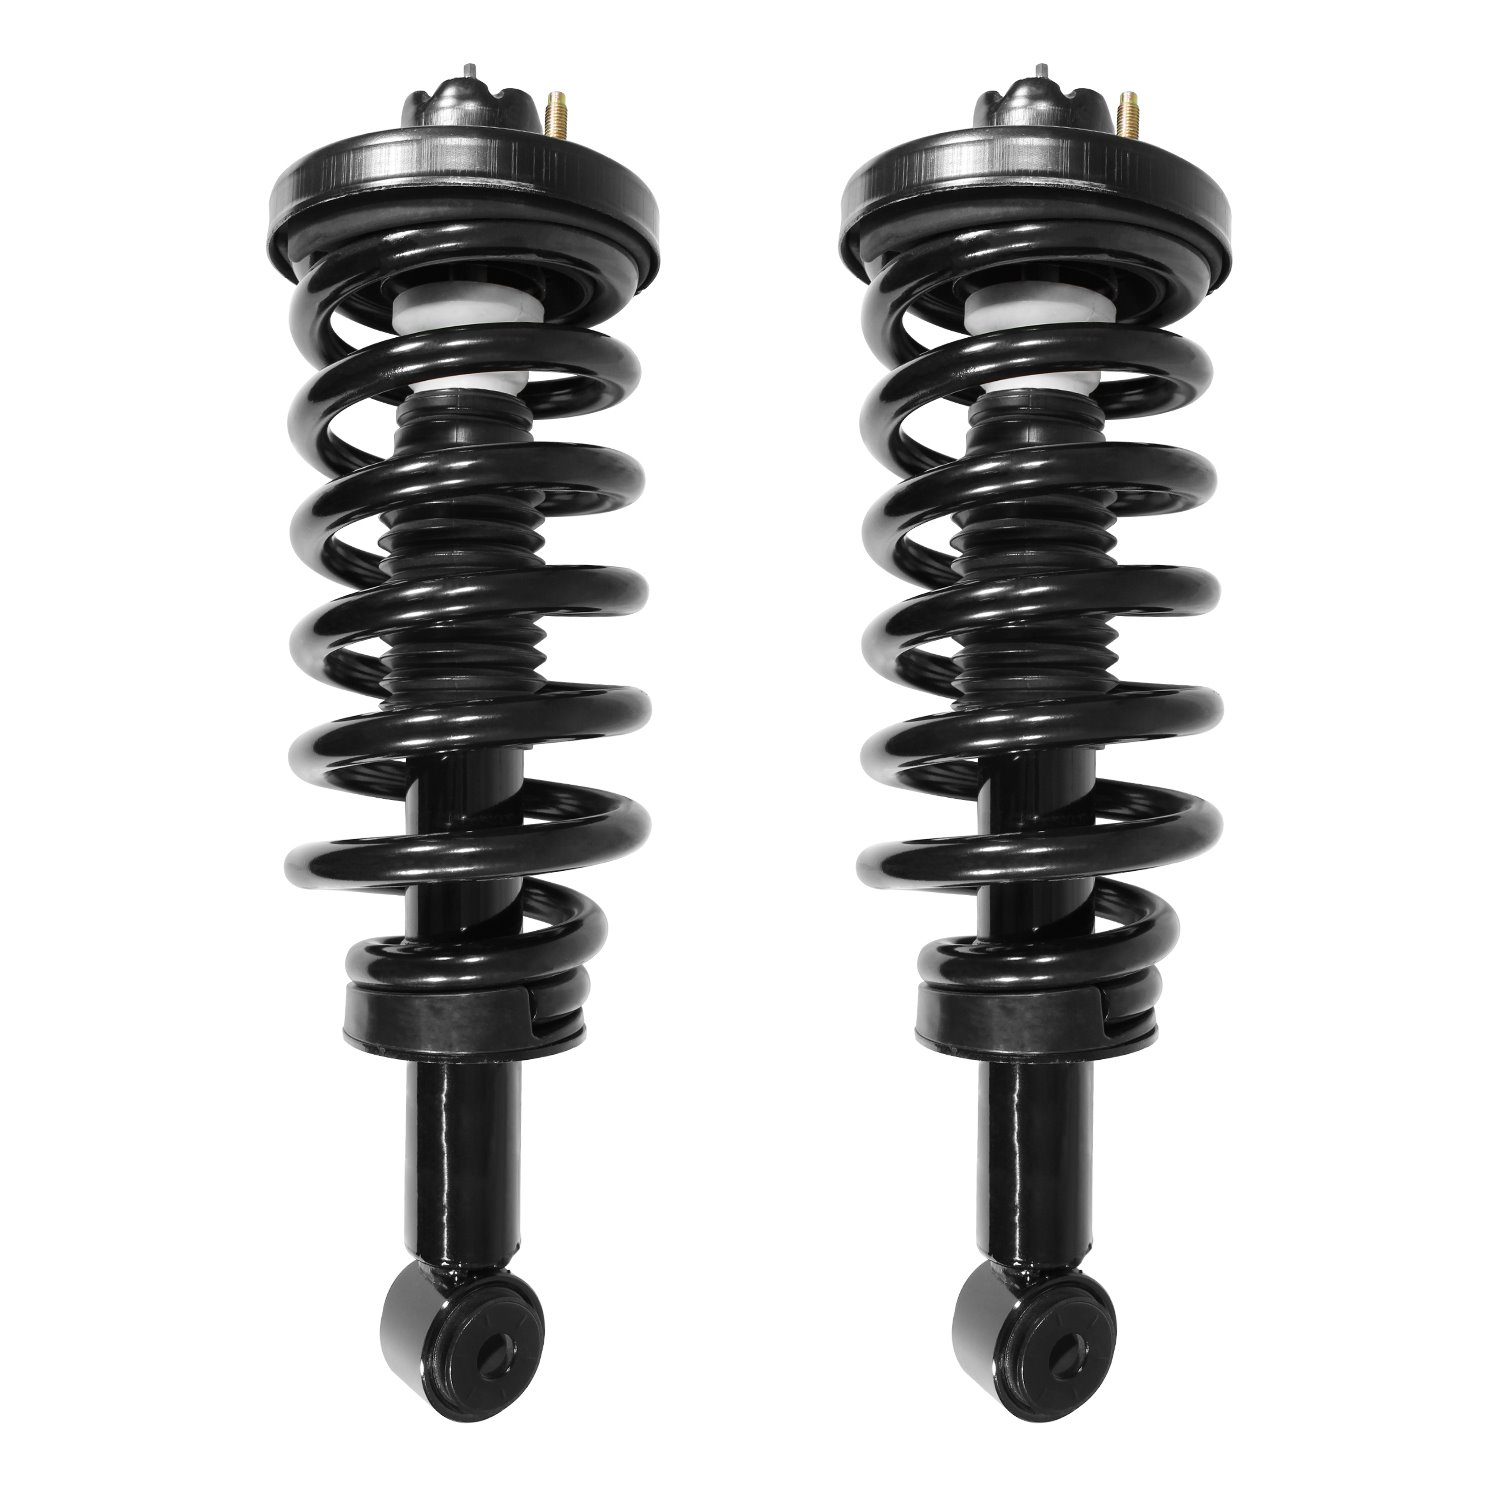 2-15080-001 Suspension Strut & Coil Spring Assembly Set Fits Select Ford Expedition, Lincoln Navigator